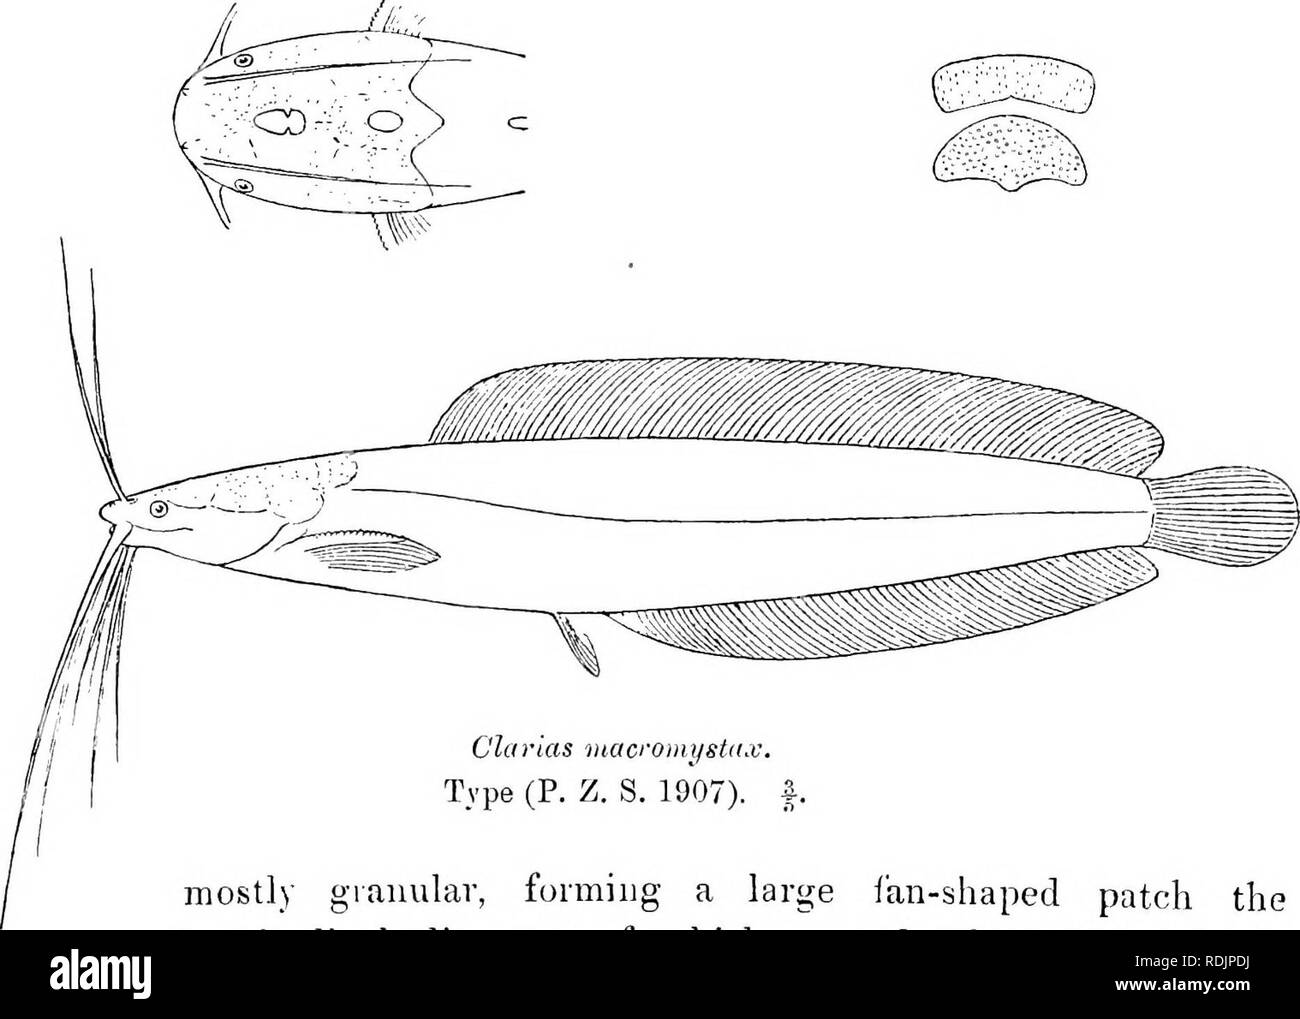 . Catalogue of the fresh-water fishes of Africa in the British museum (Natural history) ... Fishes; Freshwater animals. 2-5G SILUEID.E. 24. CLARIAS MACROMYSTAX. Giinth. Cat. Fish. v. p. 17 (1864) ; Bouleng. Proc. Zool. Soc. 1907, p. 1084, fig. Depth of body 6^ times in total length, length of head 4 times. Head 1J as long as broad, finely granulate above; occipital process angular; frontal fontanelle oval, not quite twice as long as broad; occipital fontanelle smaller, in advance of occipital process; eye small, its diameter 3 times in length of snout, 5| times in interorbital width, which equ Stock Photo